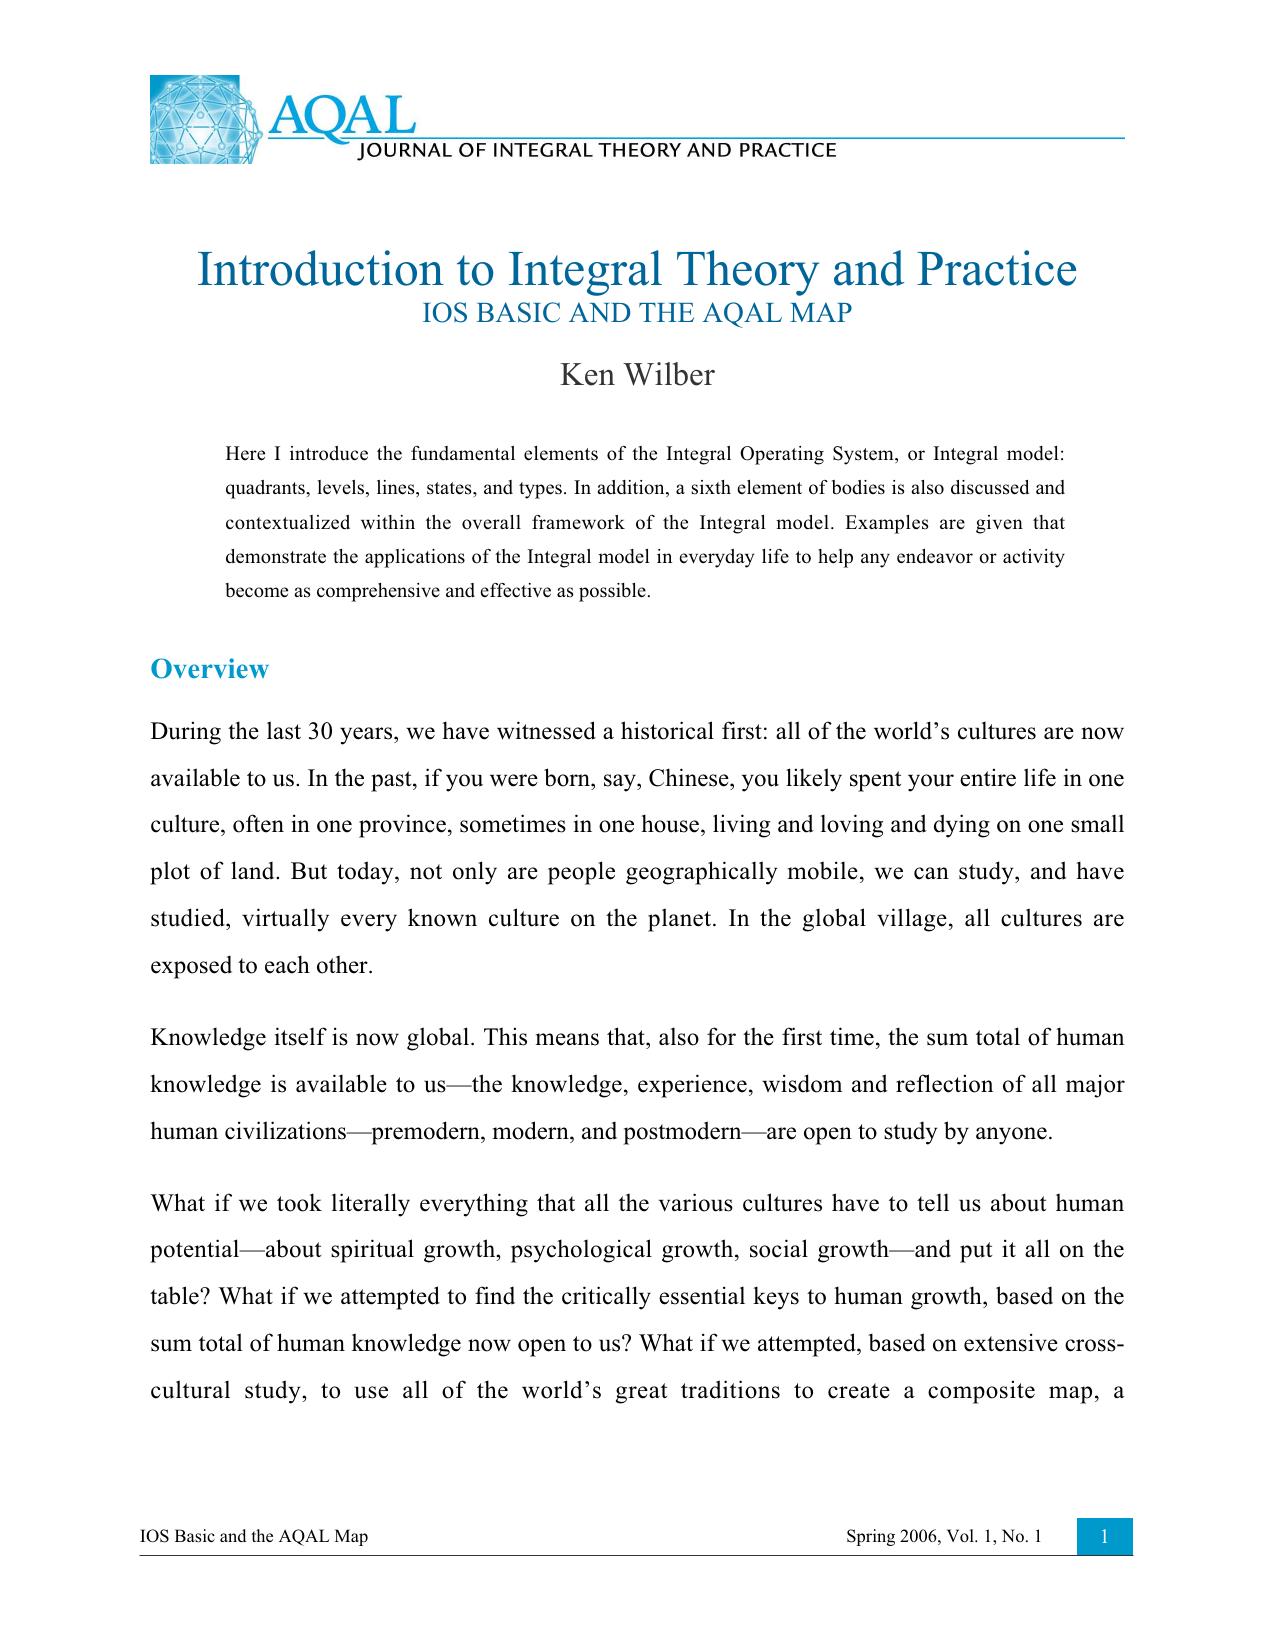 AQAL - Journal of Integral Theory and Practice - Spring